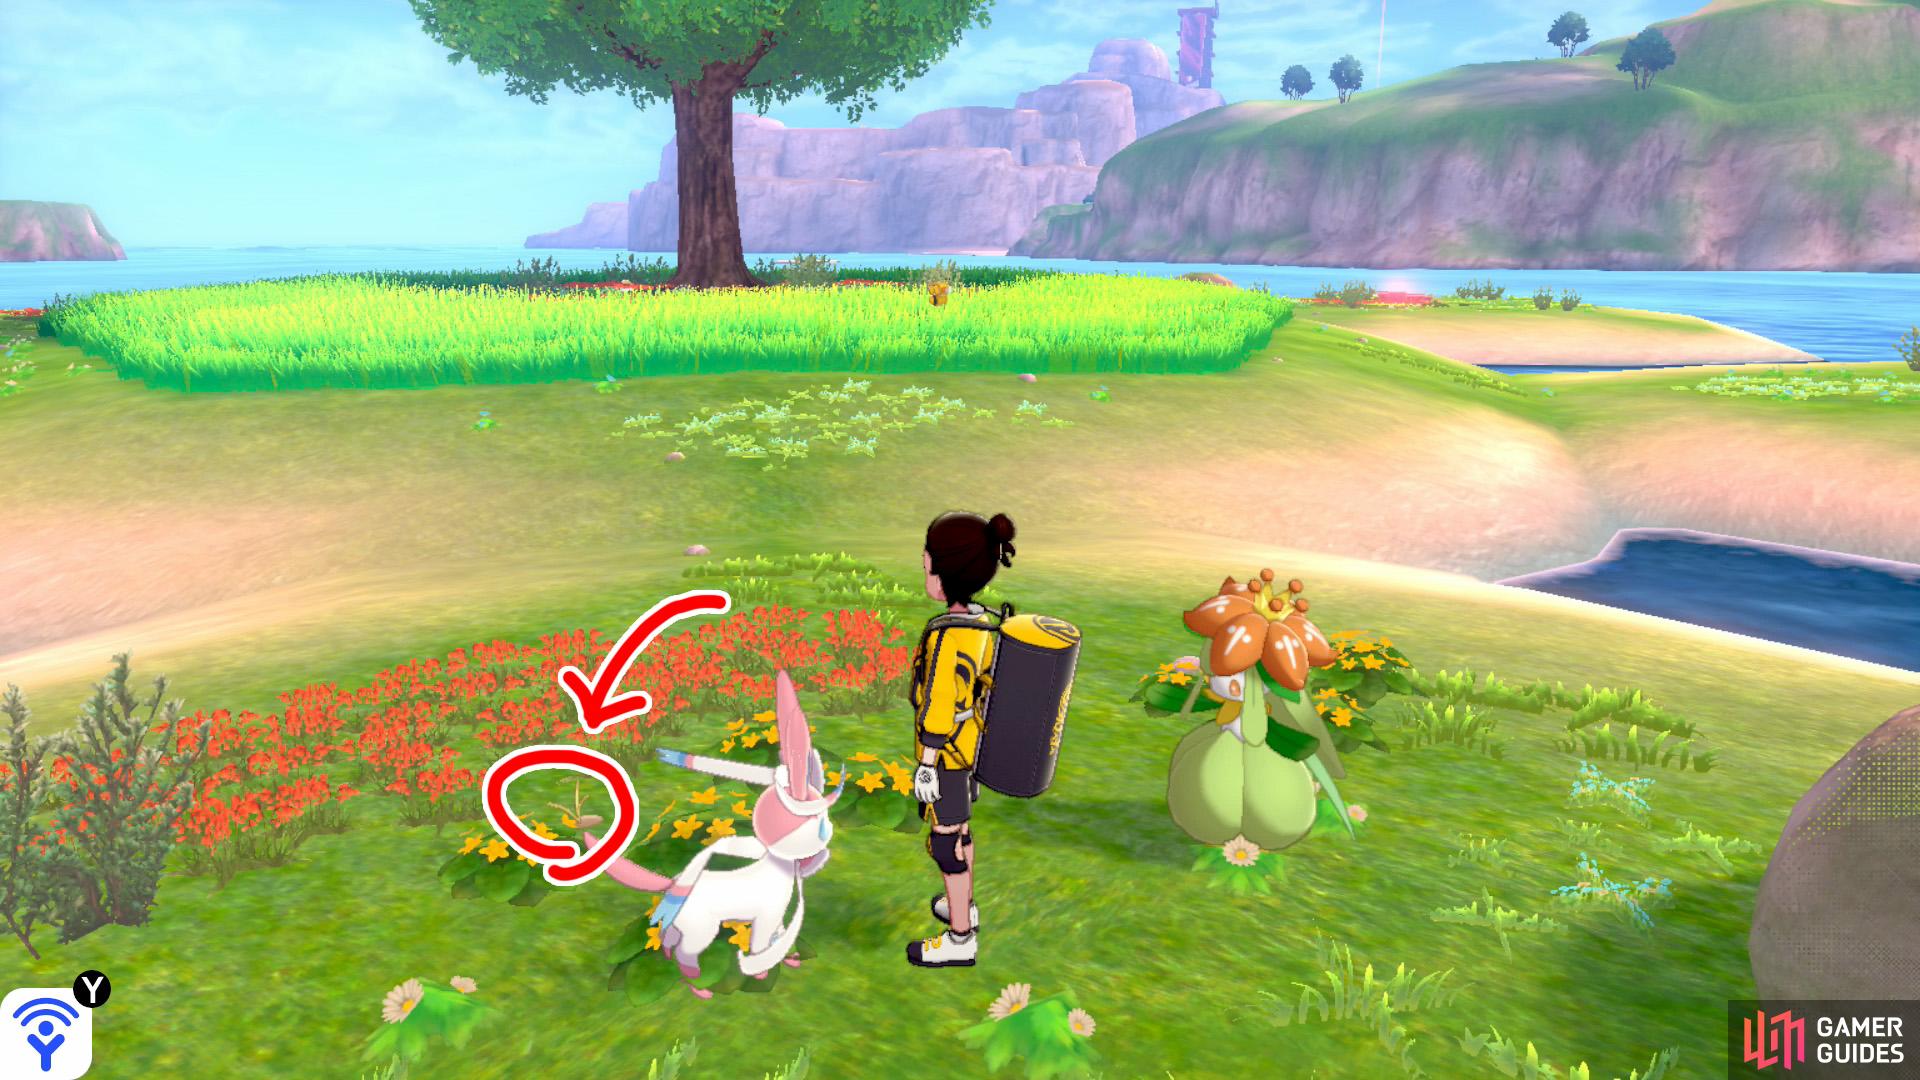 4/11: From Diglett 3, head for the third "petal". There should be a boulder here, but the boulder's a red herring. Near the middle of the island, check where the red and yellow flowers meet.